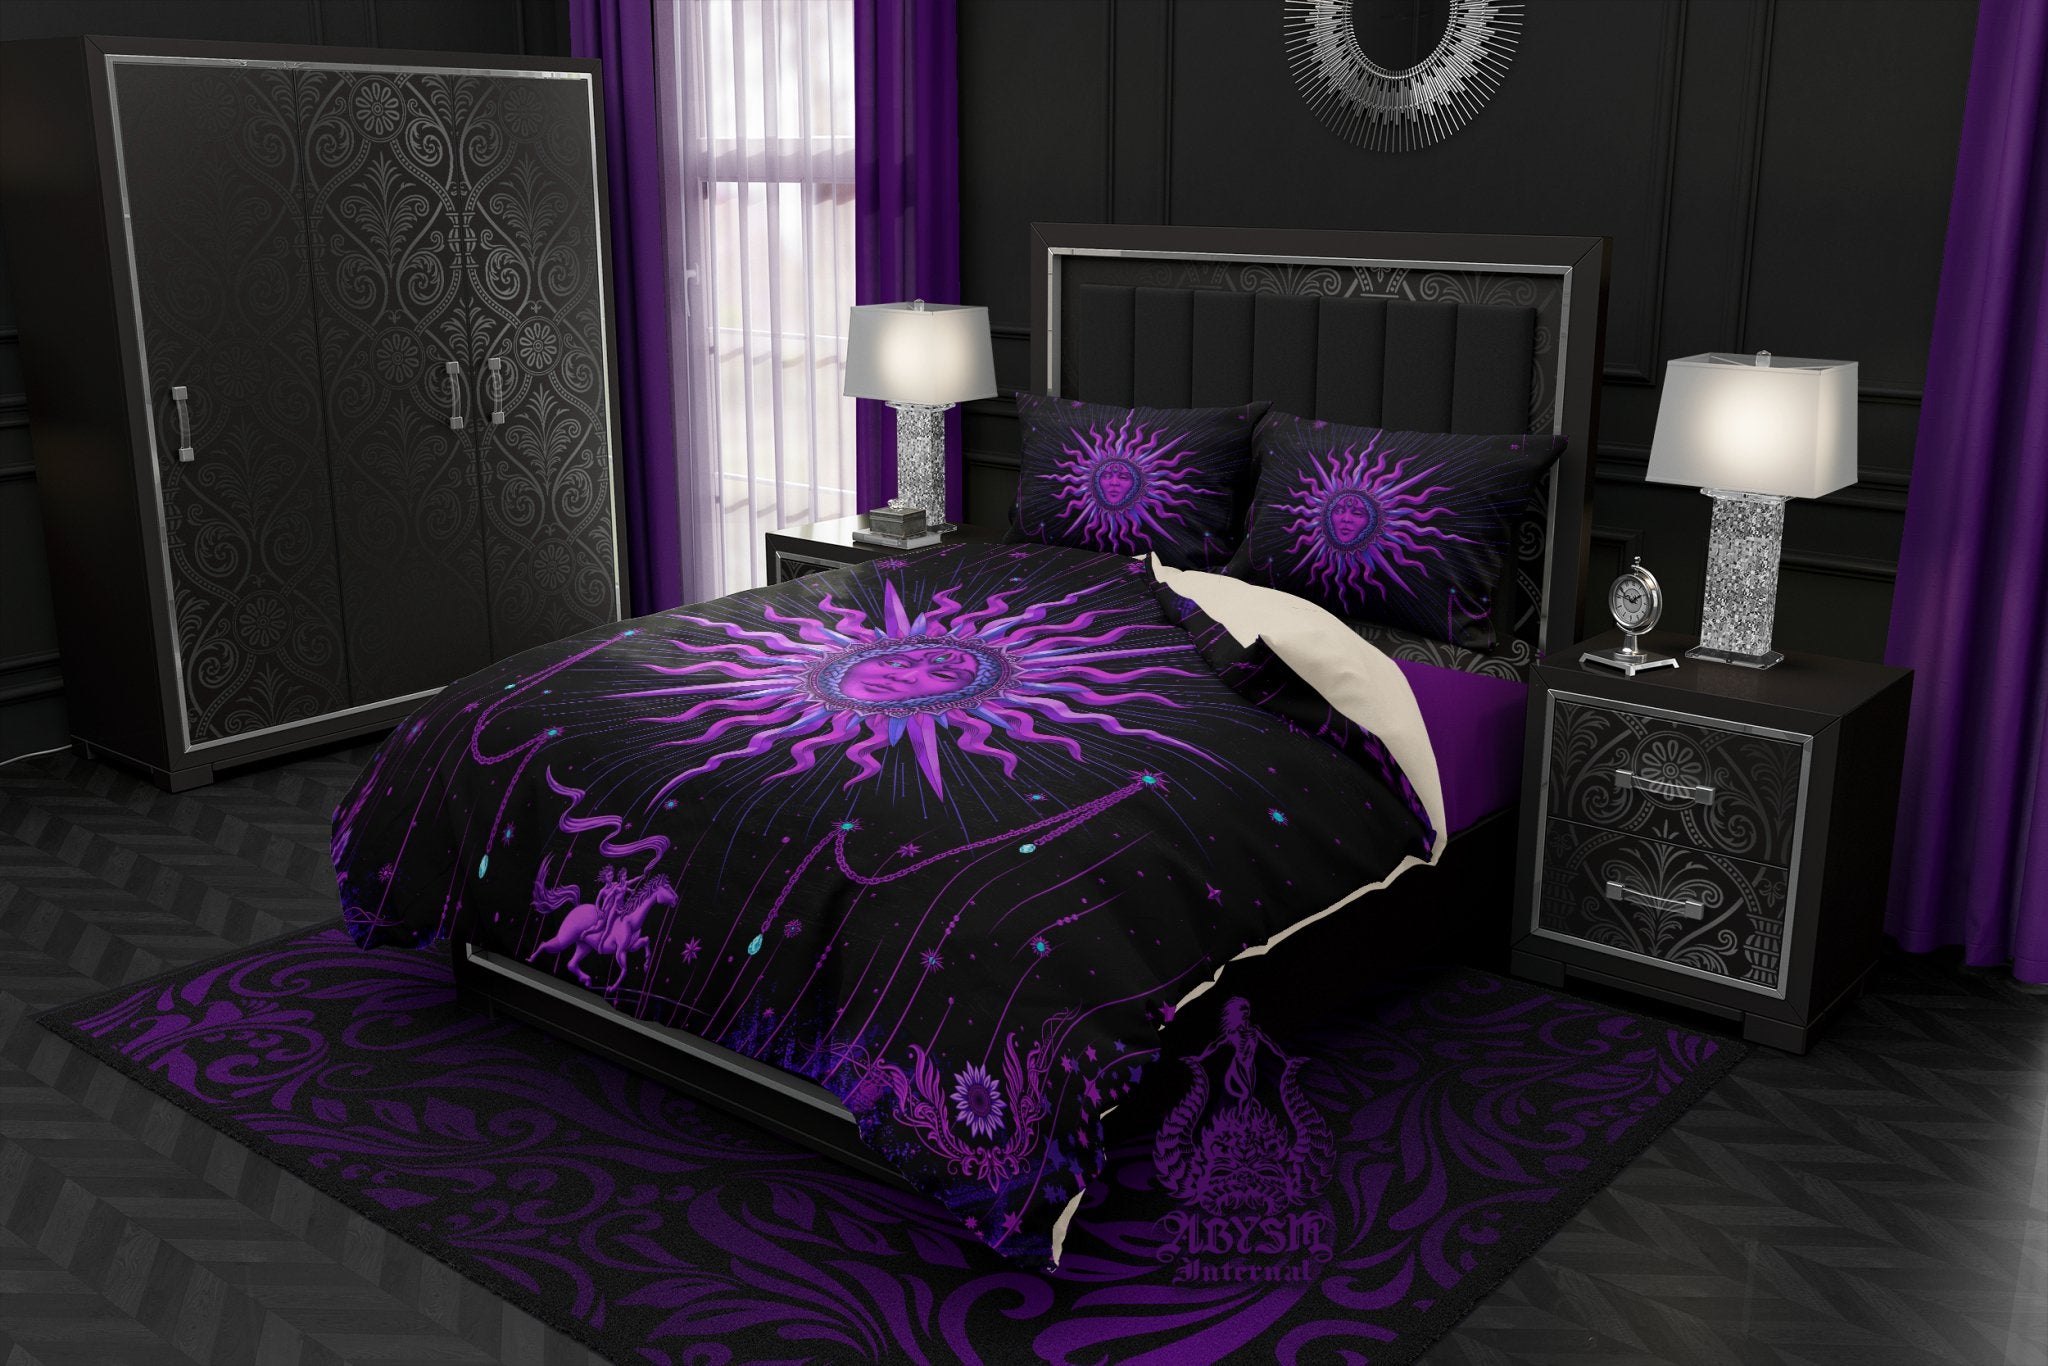 Pastel Goth Sun Duvet Cover, Bed Covering, Whimsigoth Comforter, Black and Purple Bedroom Decor King, Queen & Twin Bedding Set - Tarot Arcana Art - Abysm Internal